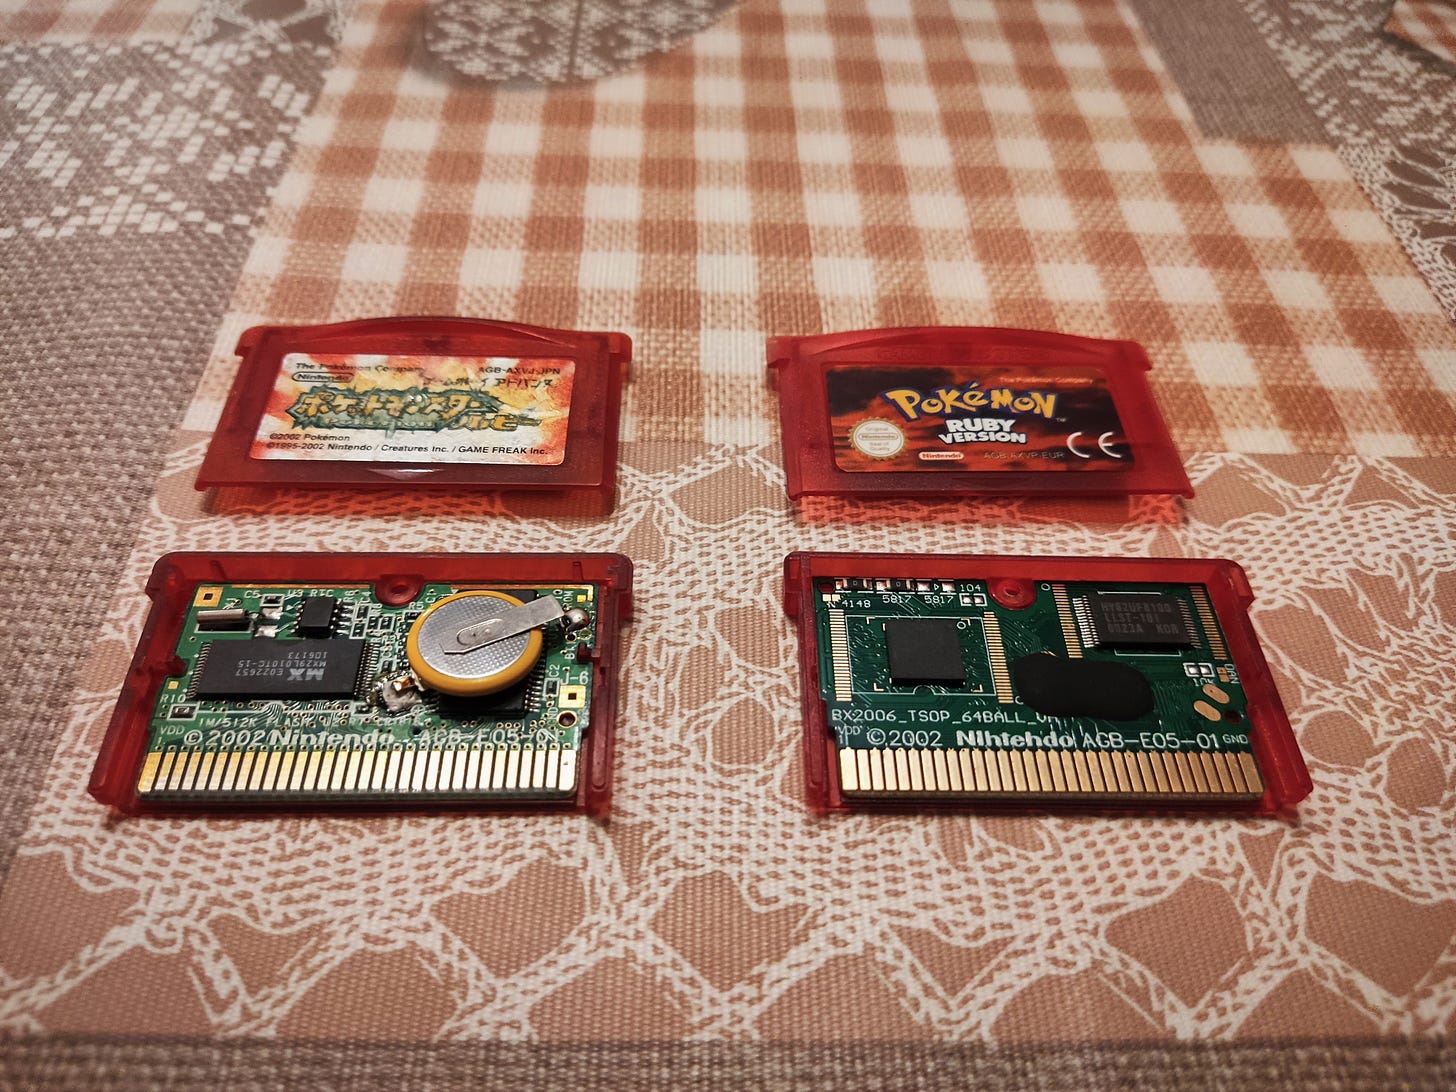 Copies of Pokémon Ruby. Left side is a genuine Japanese cartridge, right side is a reproduction (Photo credit: Lucent)